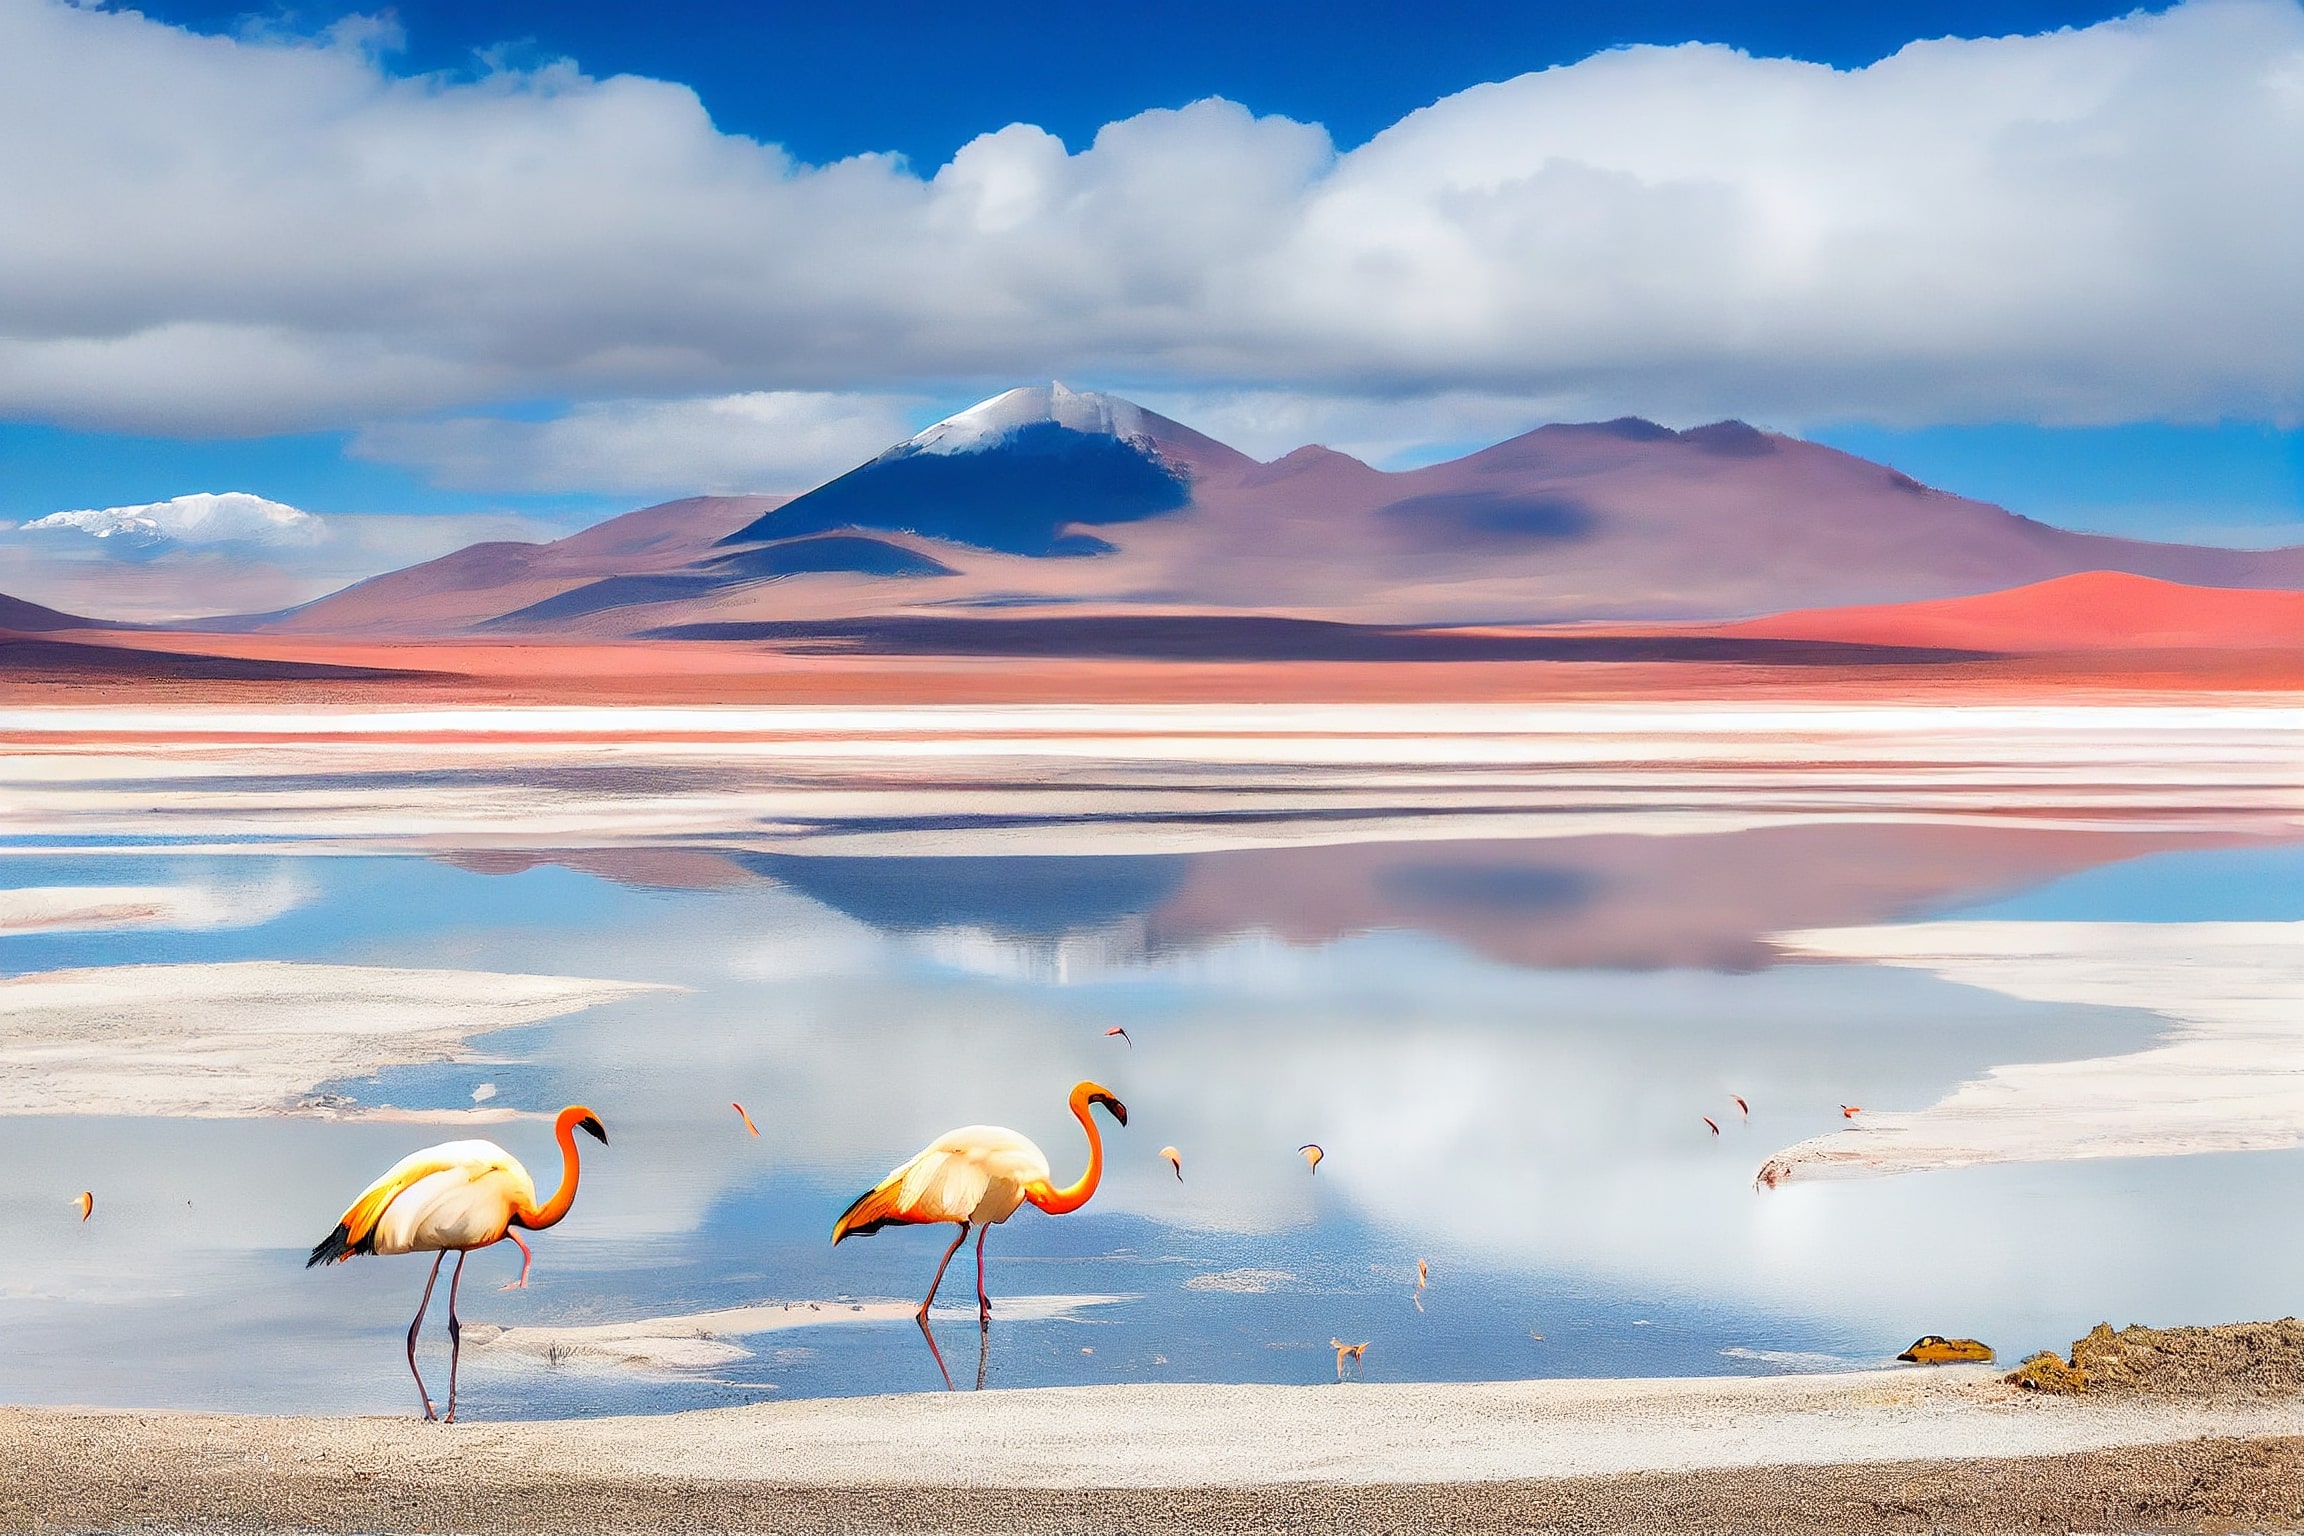 Two flamingos are standing in the water with mountains in the background.